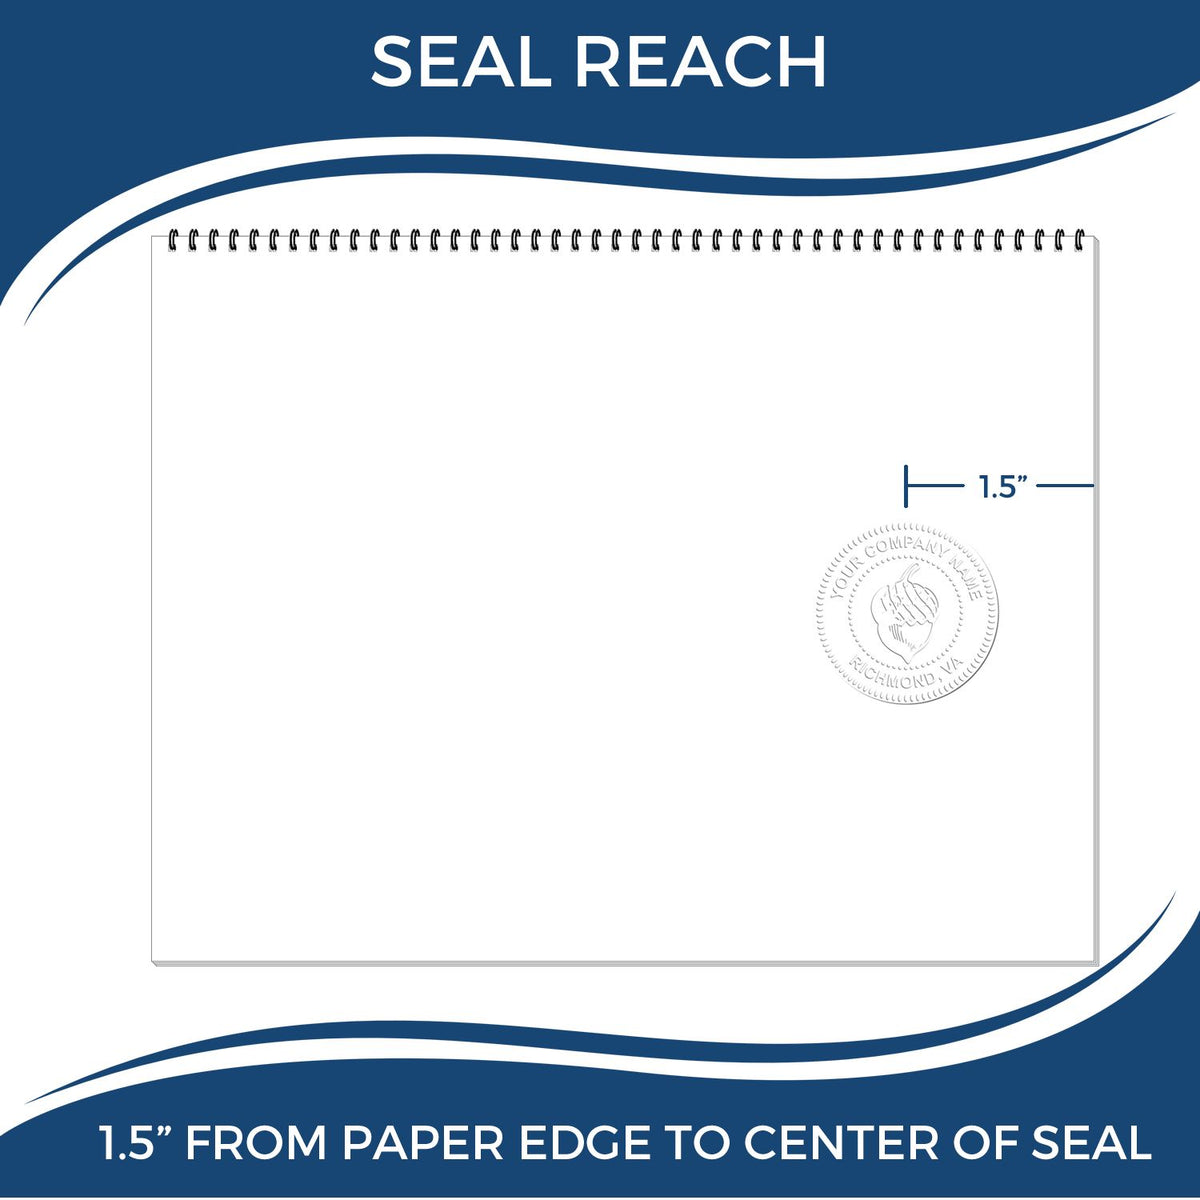 An infographic showing the seal reach which is represented by a ruler and a miniature seal image of the Gift Georgia Landscape Architect Seal